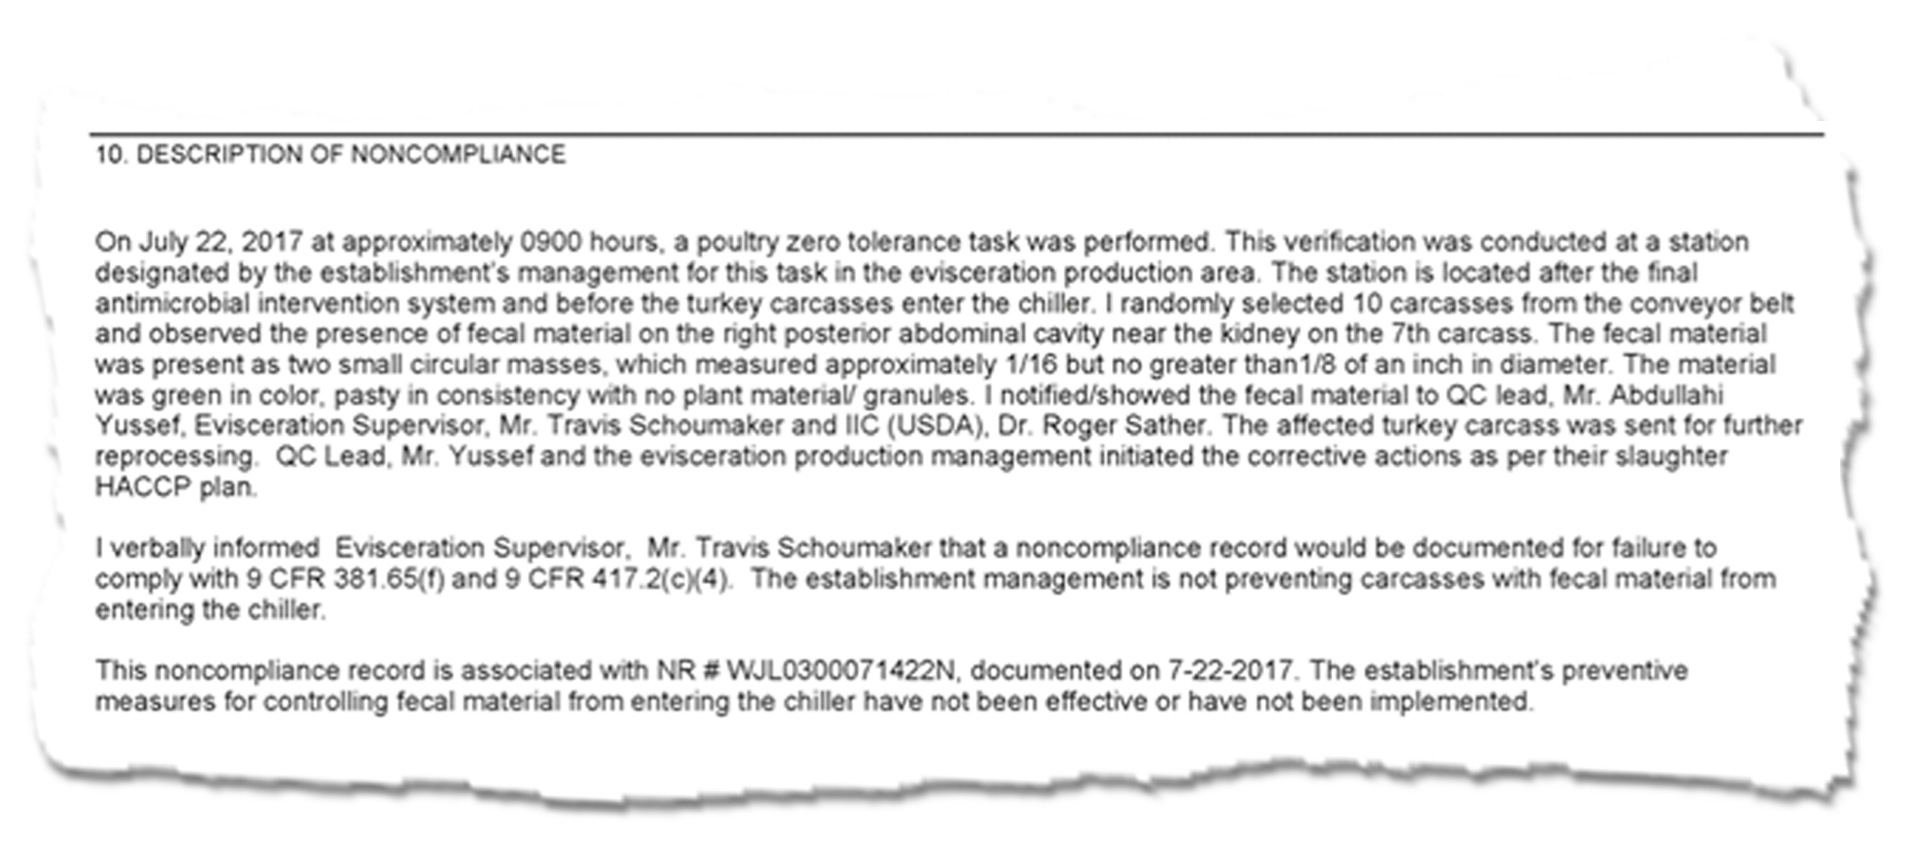 A noncompliance report description detailing the presence of fecal matter in turkey carcasses in a processing facility's chiller.